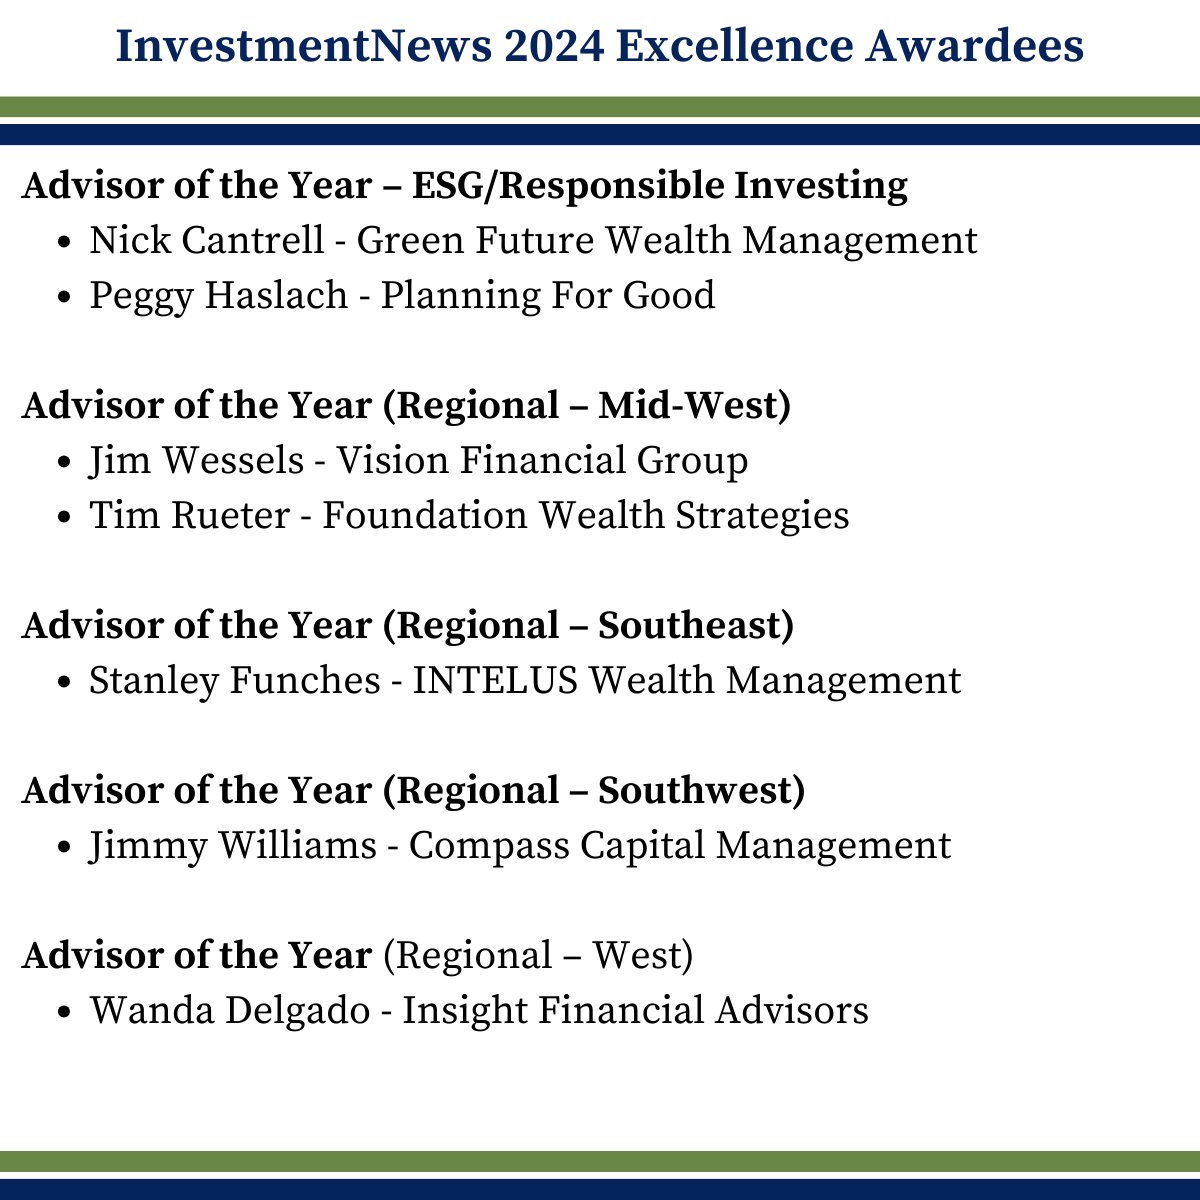 Congratulations to the FSI financial advisor members, firm members, and sponsors recognized for 2024 Investment News’ Excellence Awardees!